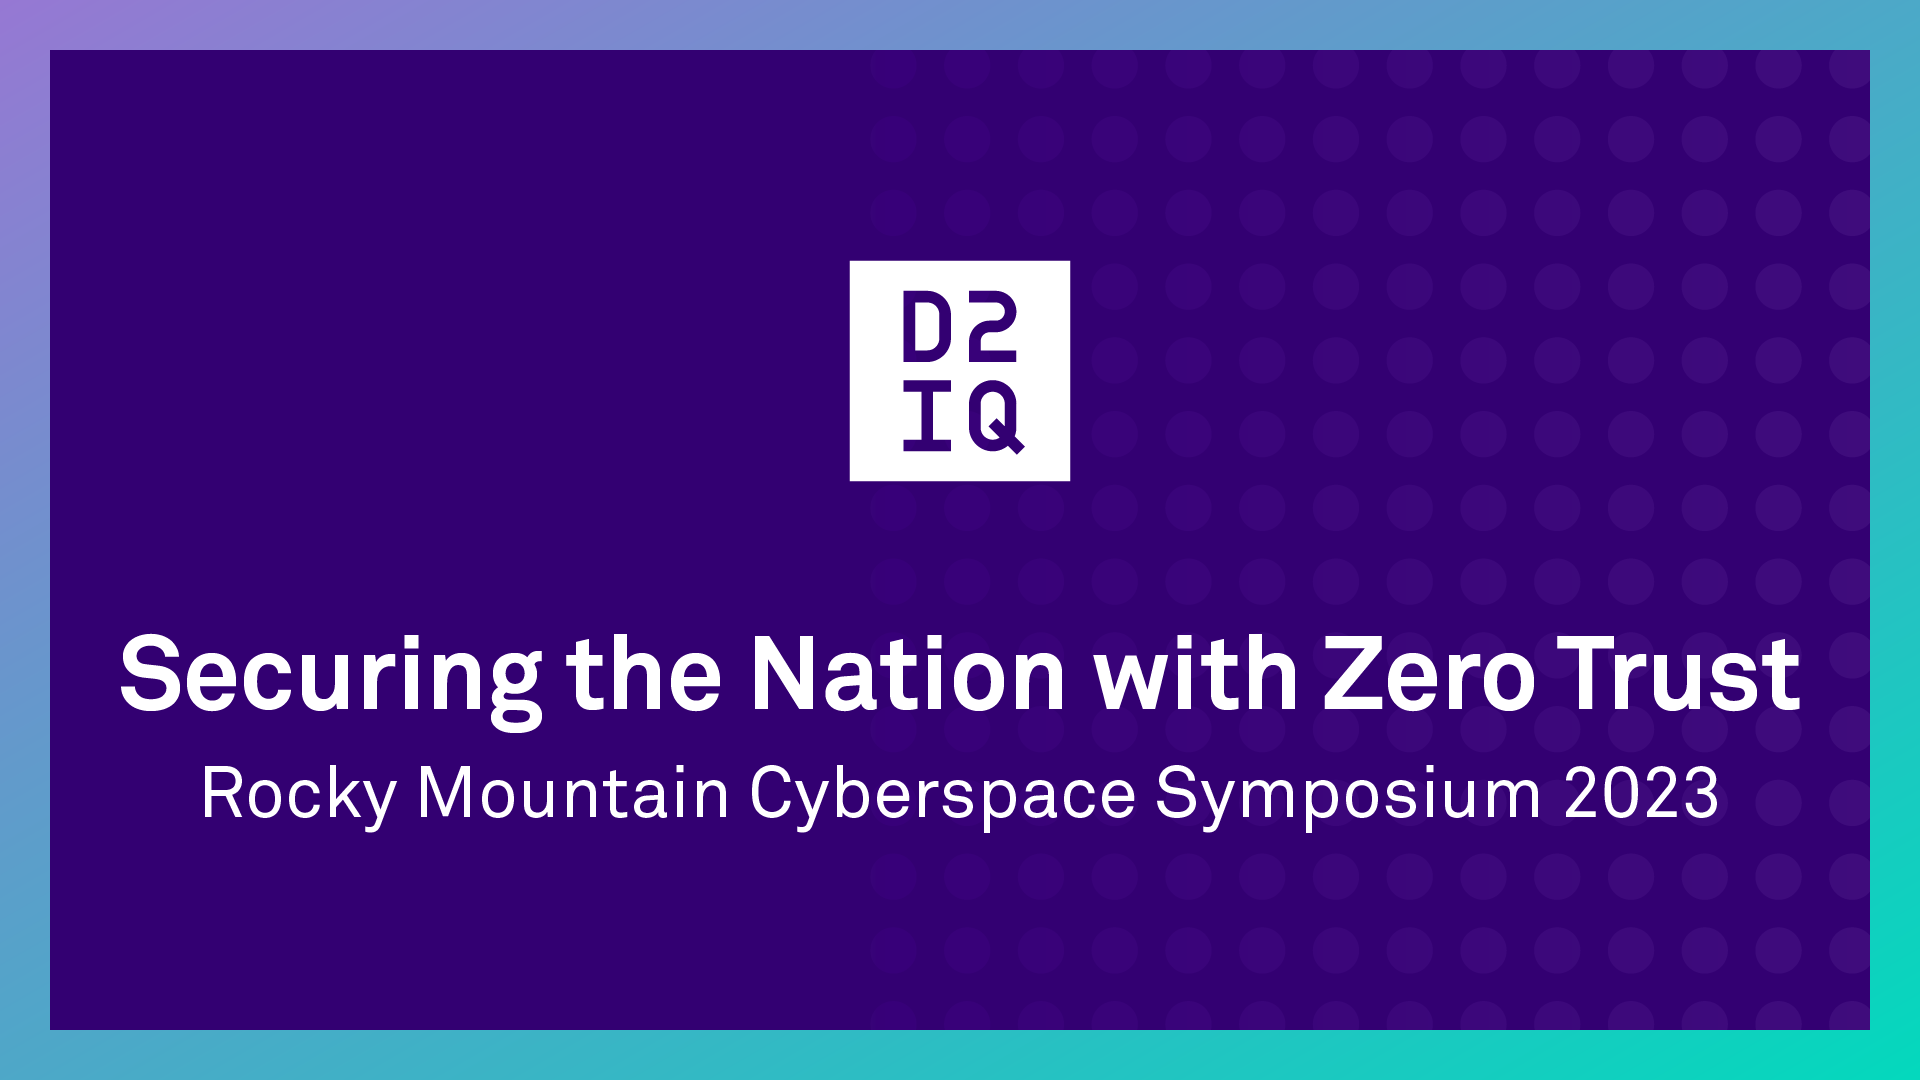 Securing the Nation with Zero Trust - Rocky Mountain Cyberspace Symposium